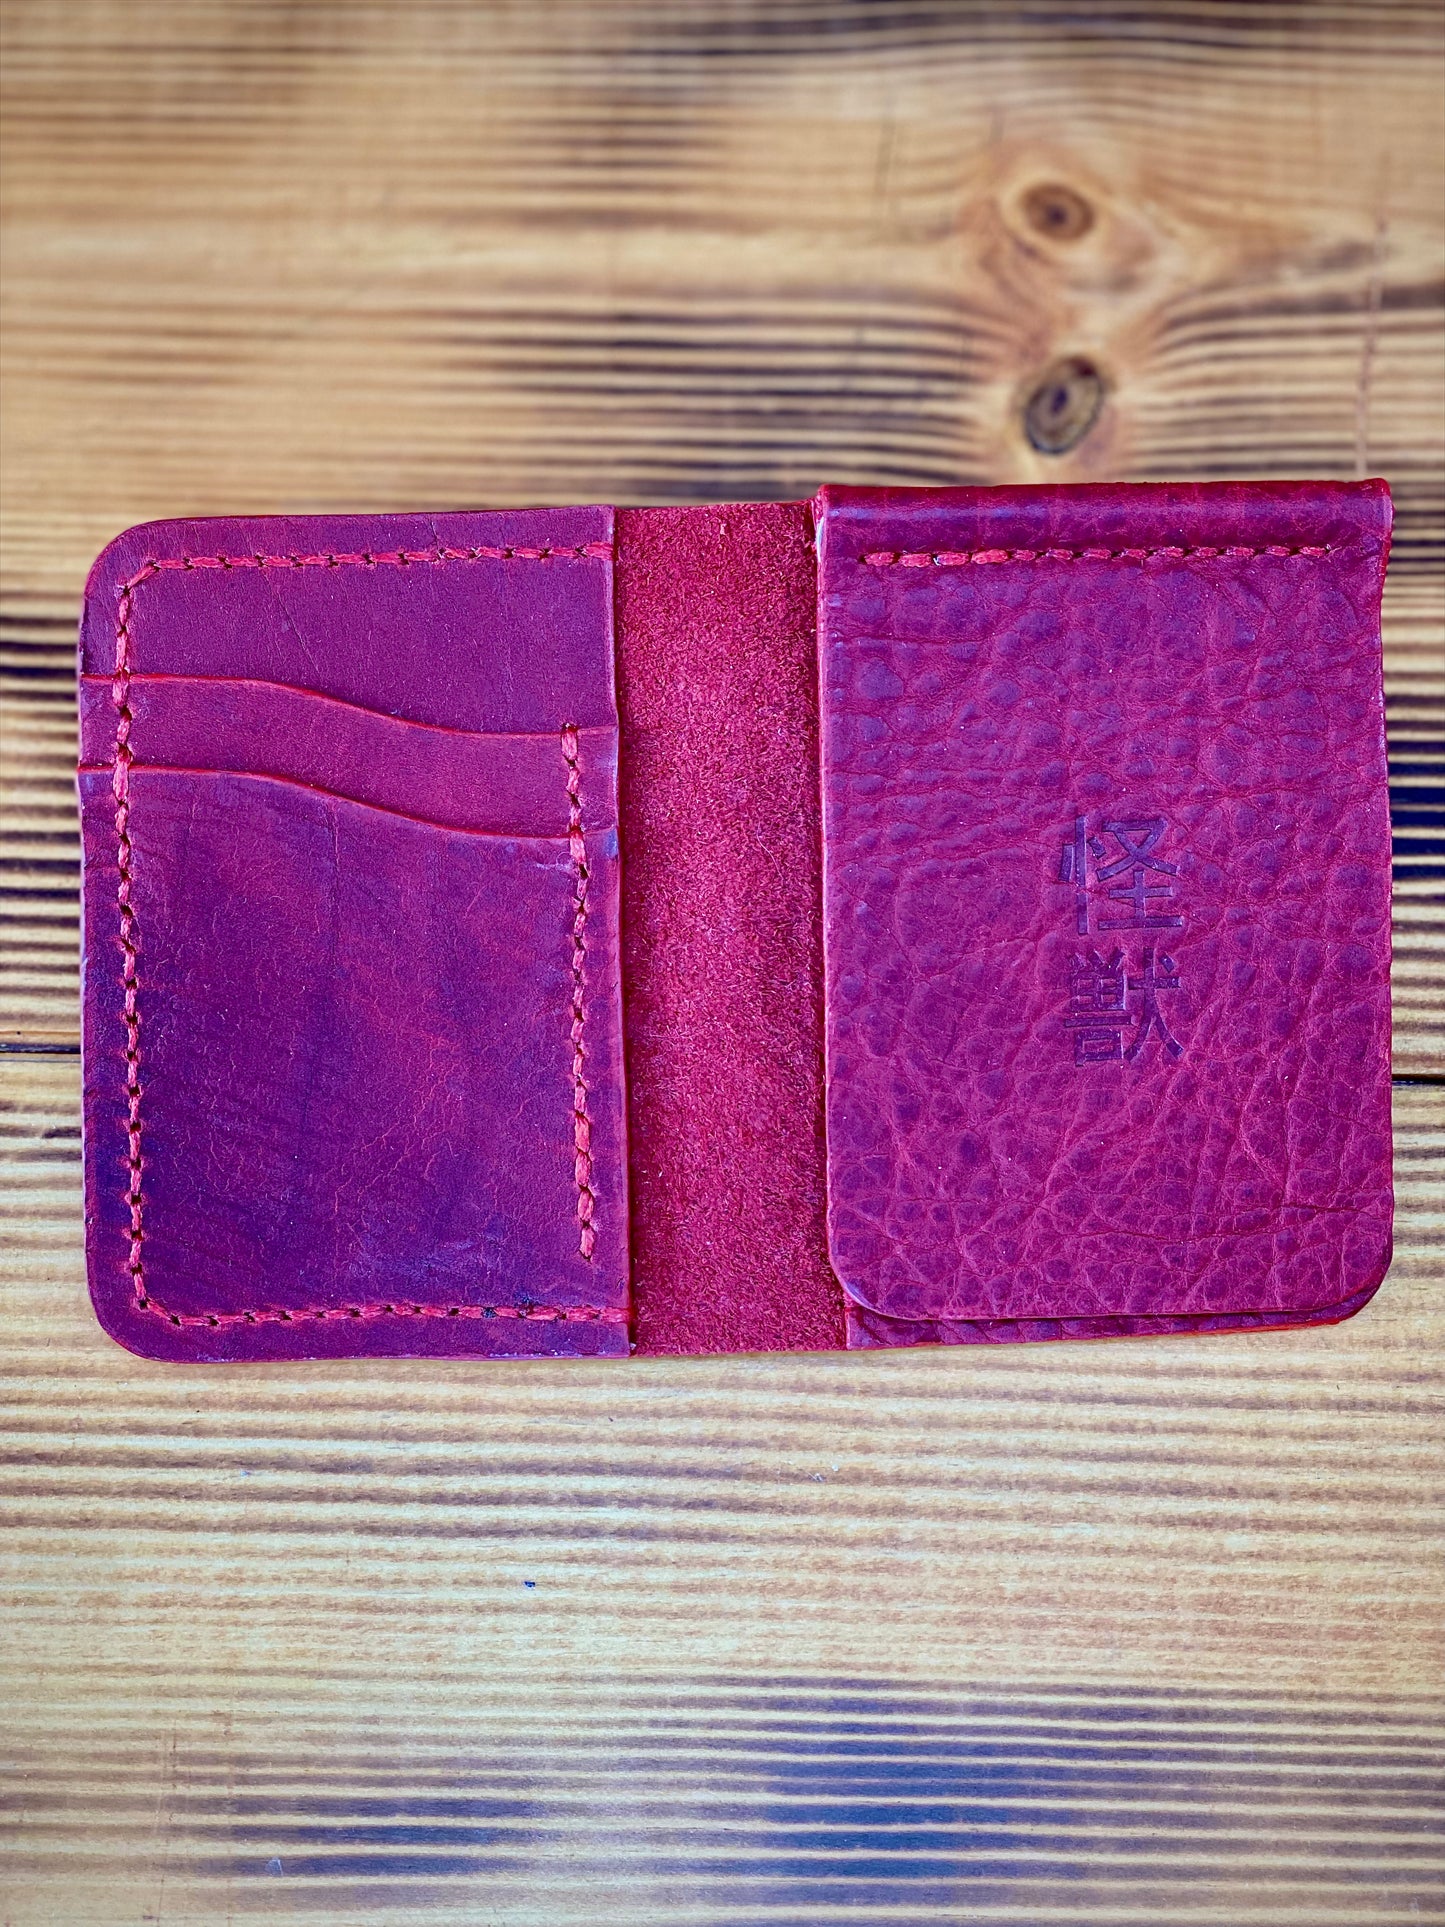 Kaiju Cut and Sew Red Bison Leather Bi-Fold Vertical Wallet with Money Clip | Handmade in Austin, TX